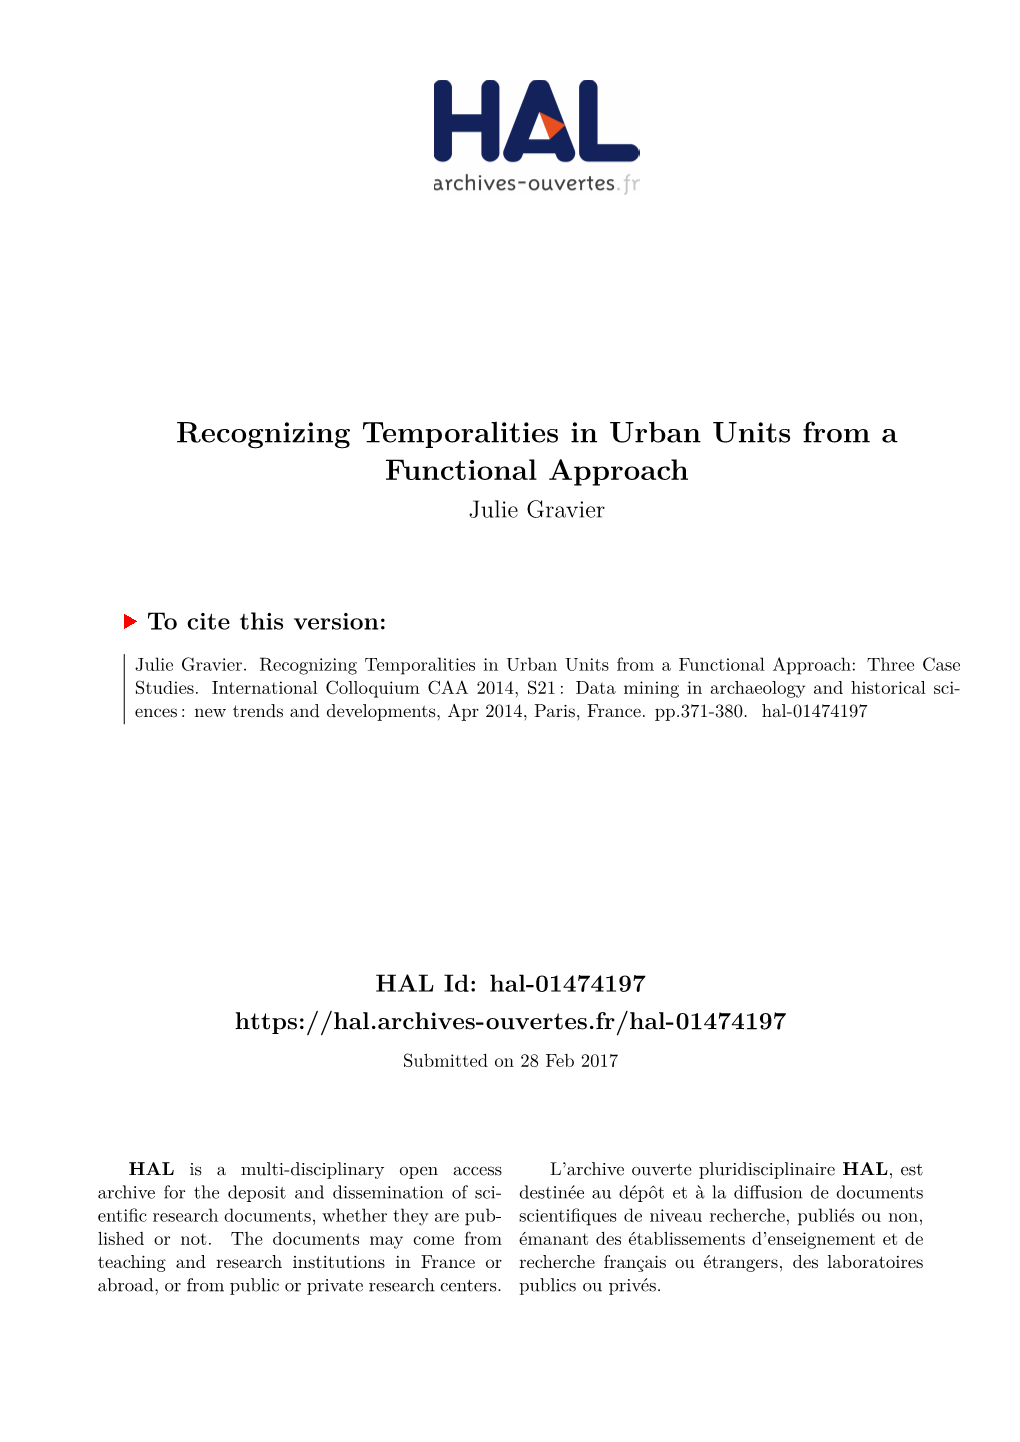 Recognizing Temporalities in Urban Units from a Functional Approach Julie Gravier